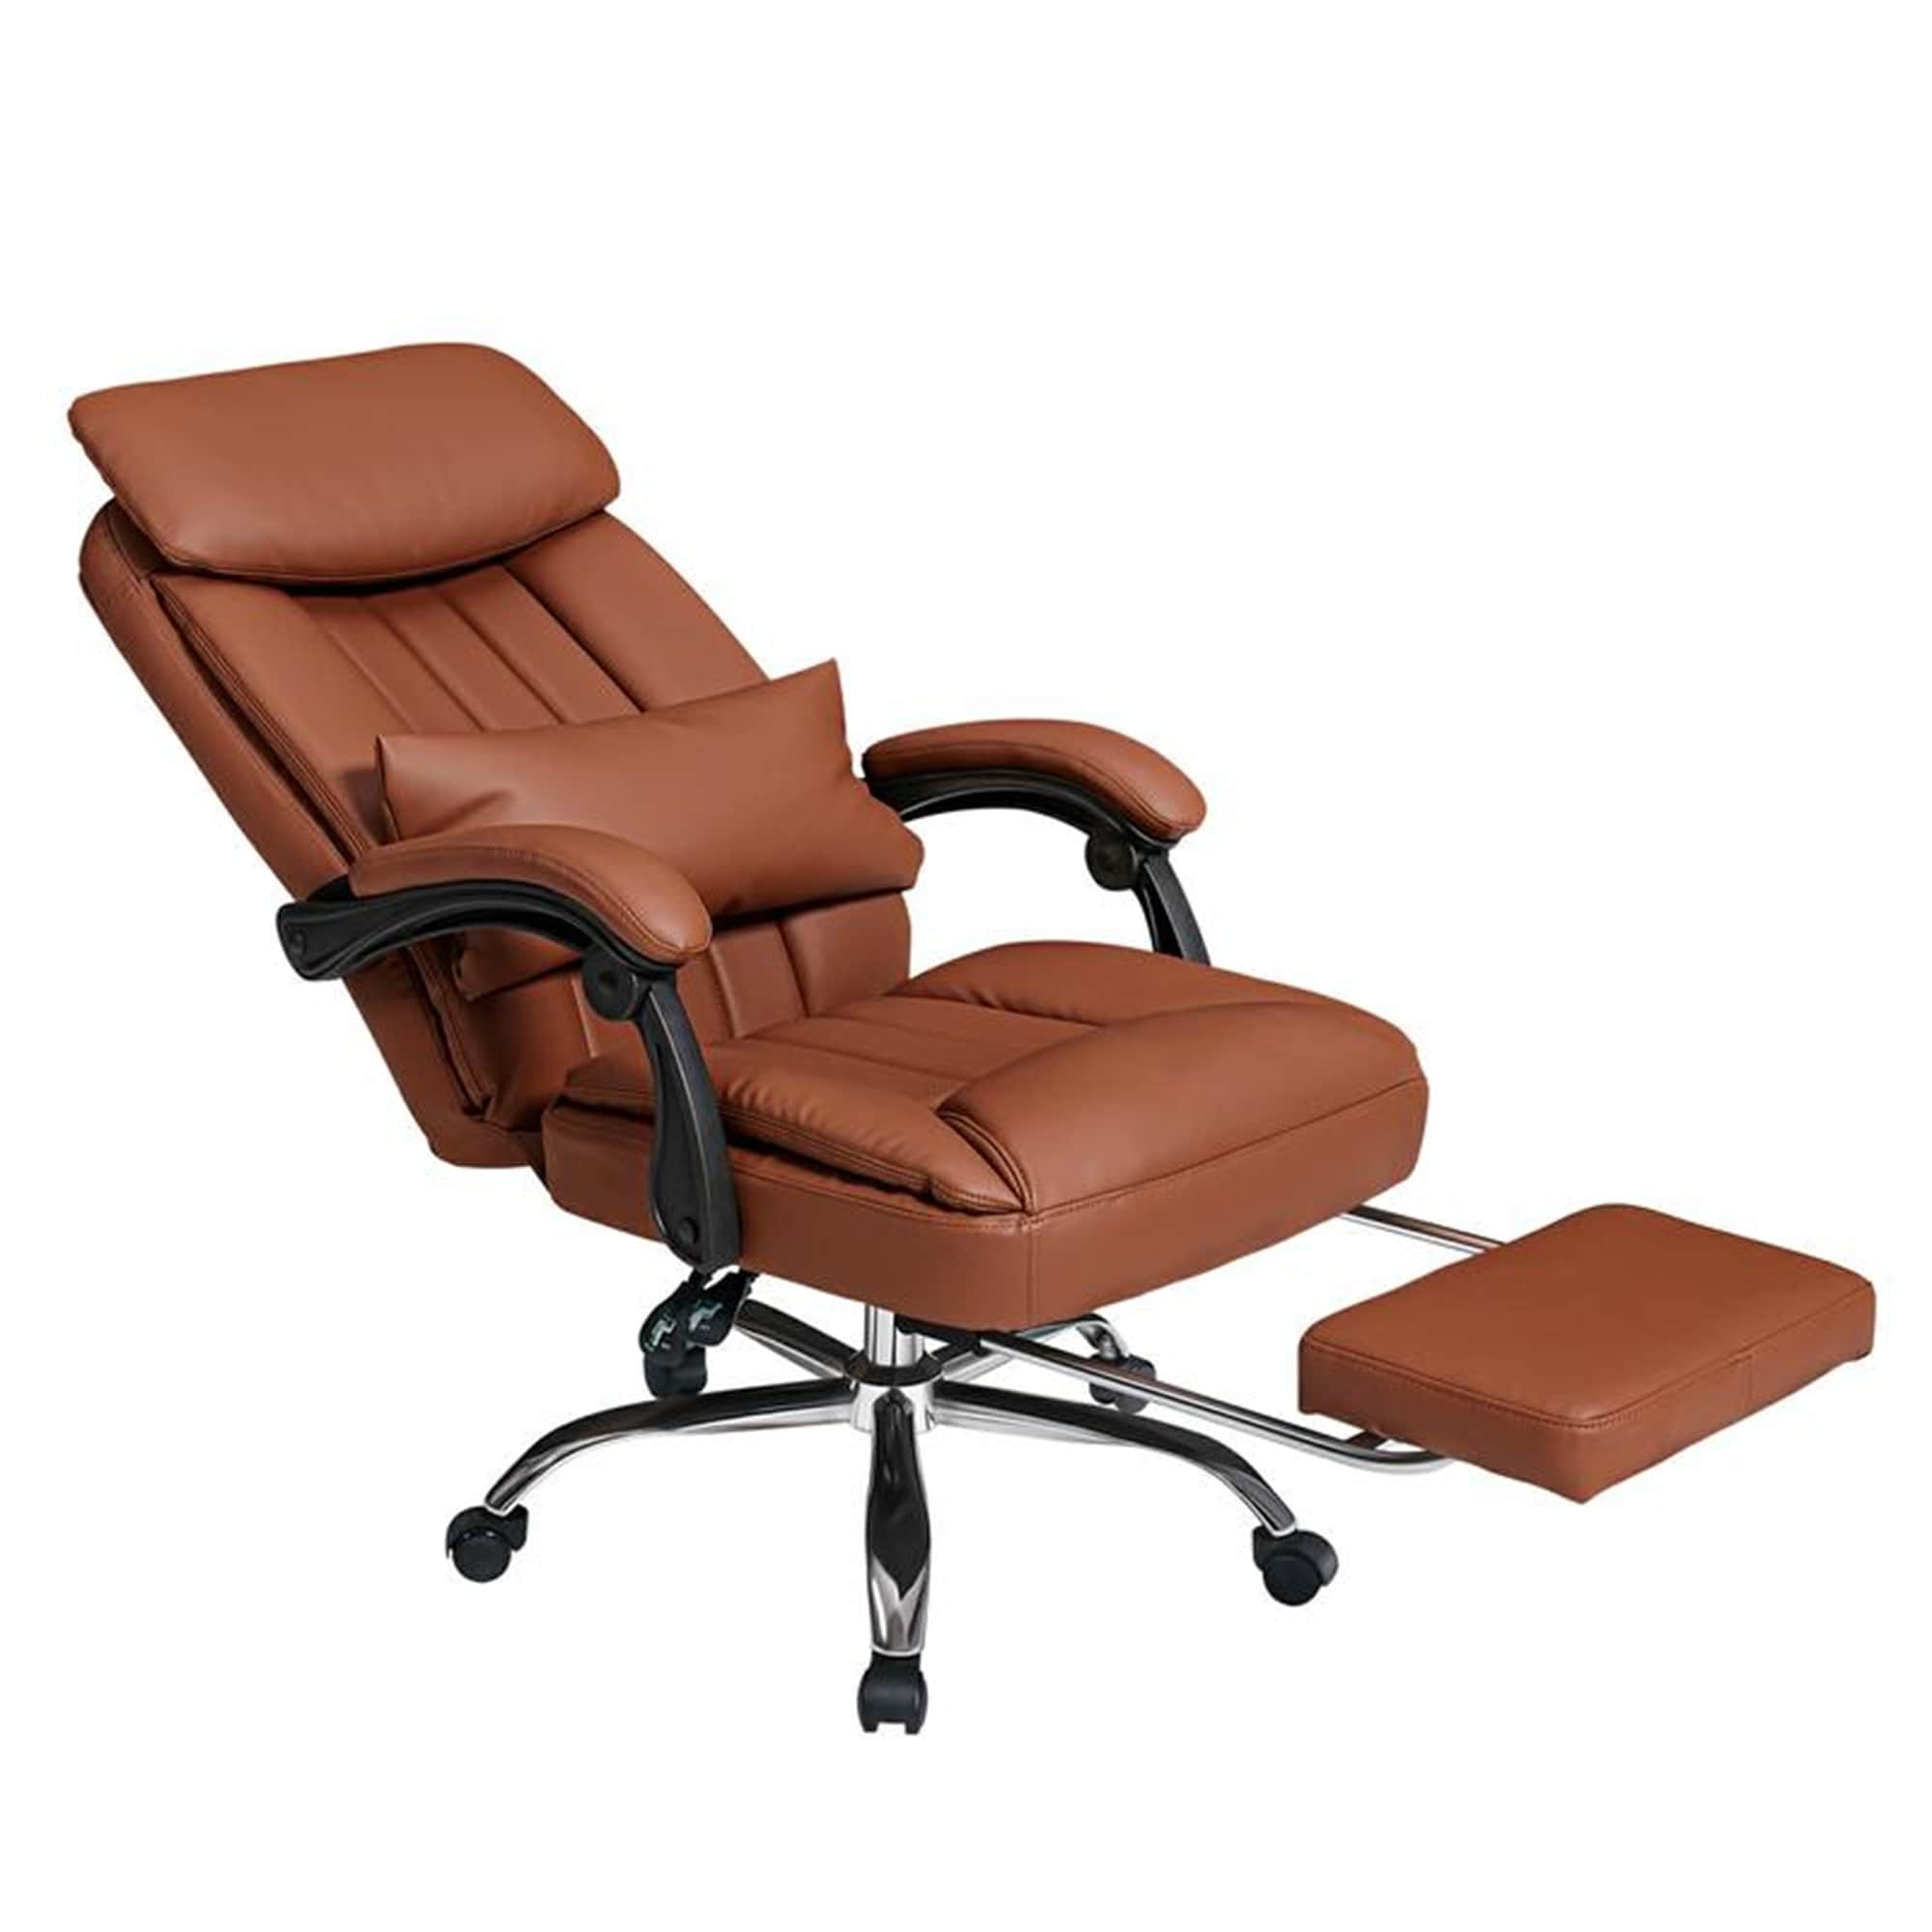 https://ak1.ostkcdn.com/images/products/is/images/direct/892a95b021bcadc3d3b9e177c70aaaeb086c62c2/Executive-Chair%2C-High-Back-Leather-Desk-Chair-W--Retractable-Footrest.jpg